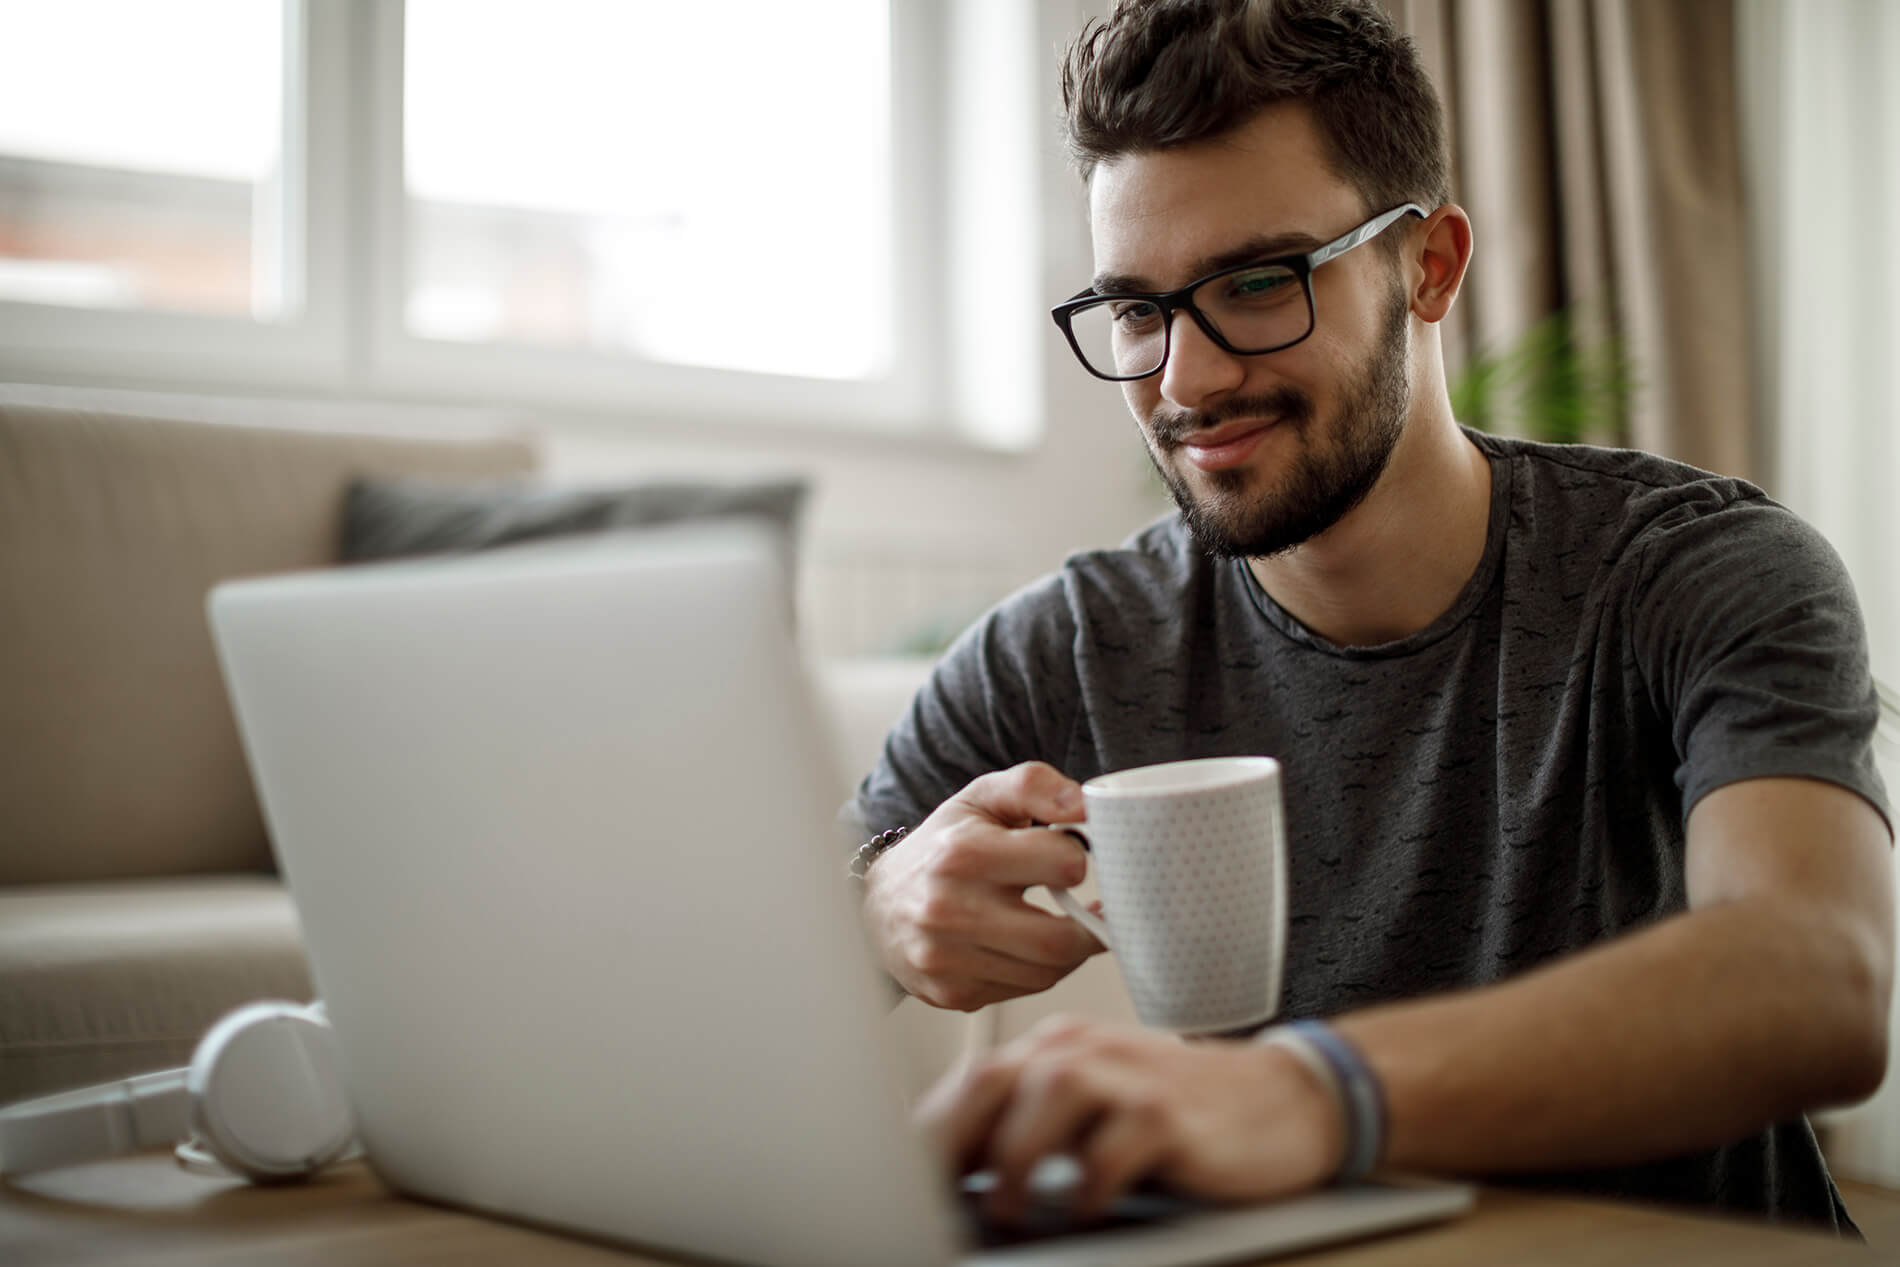 Man sipping coffee and working at laptop